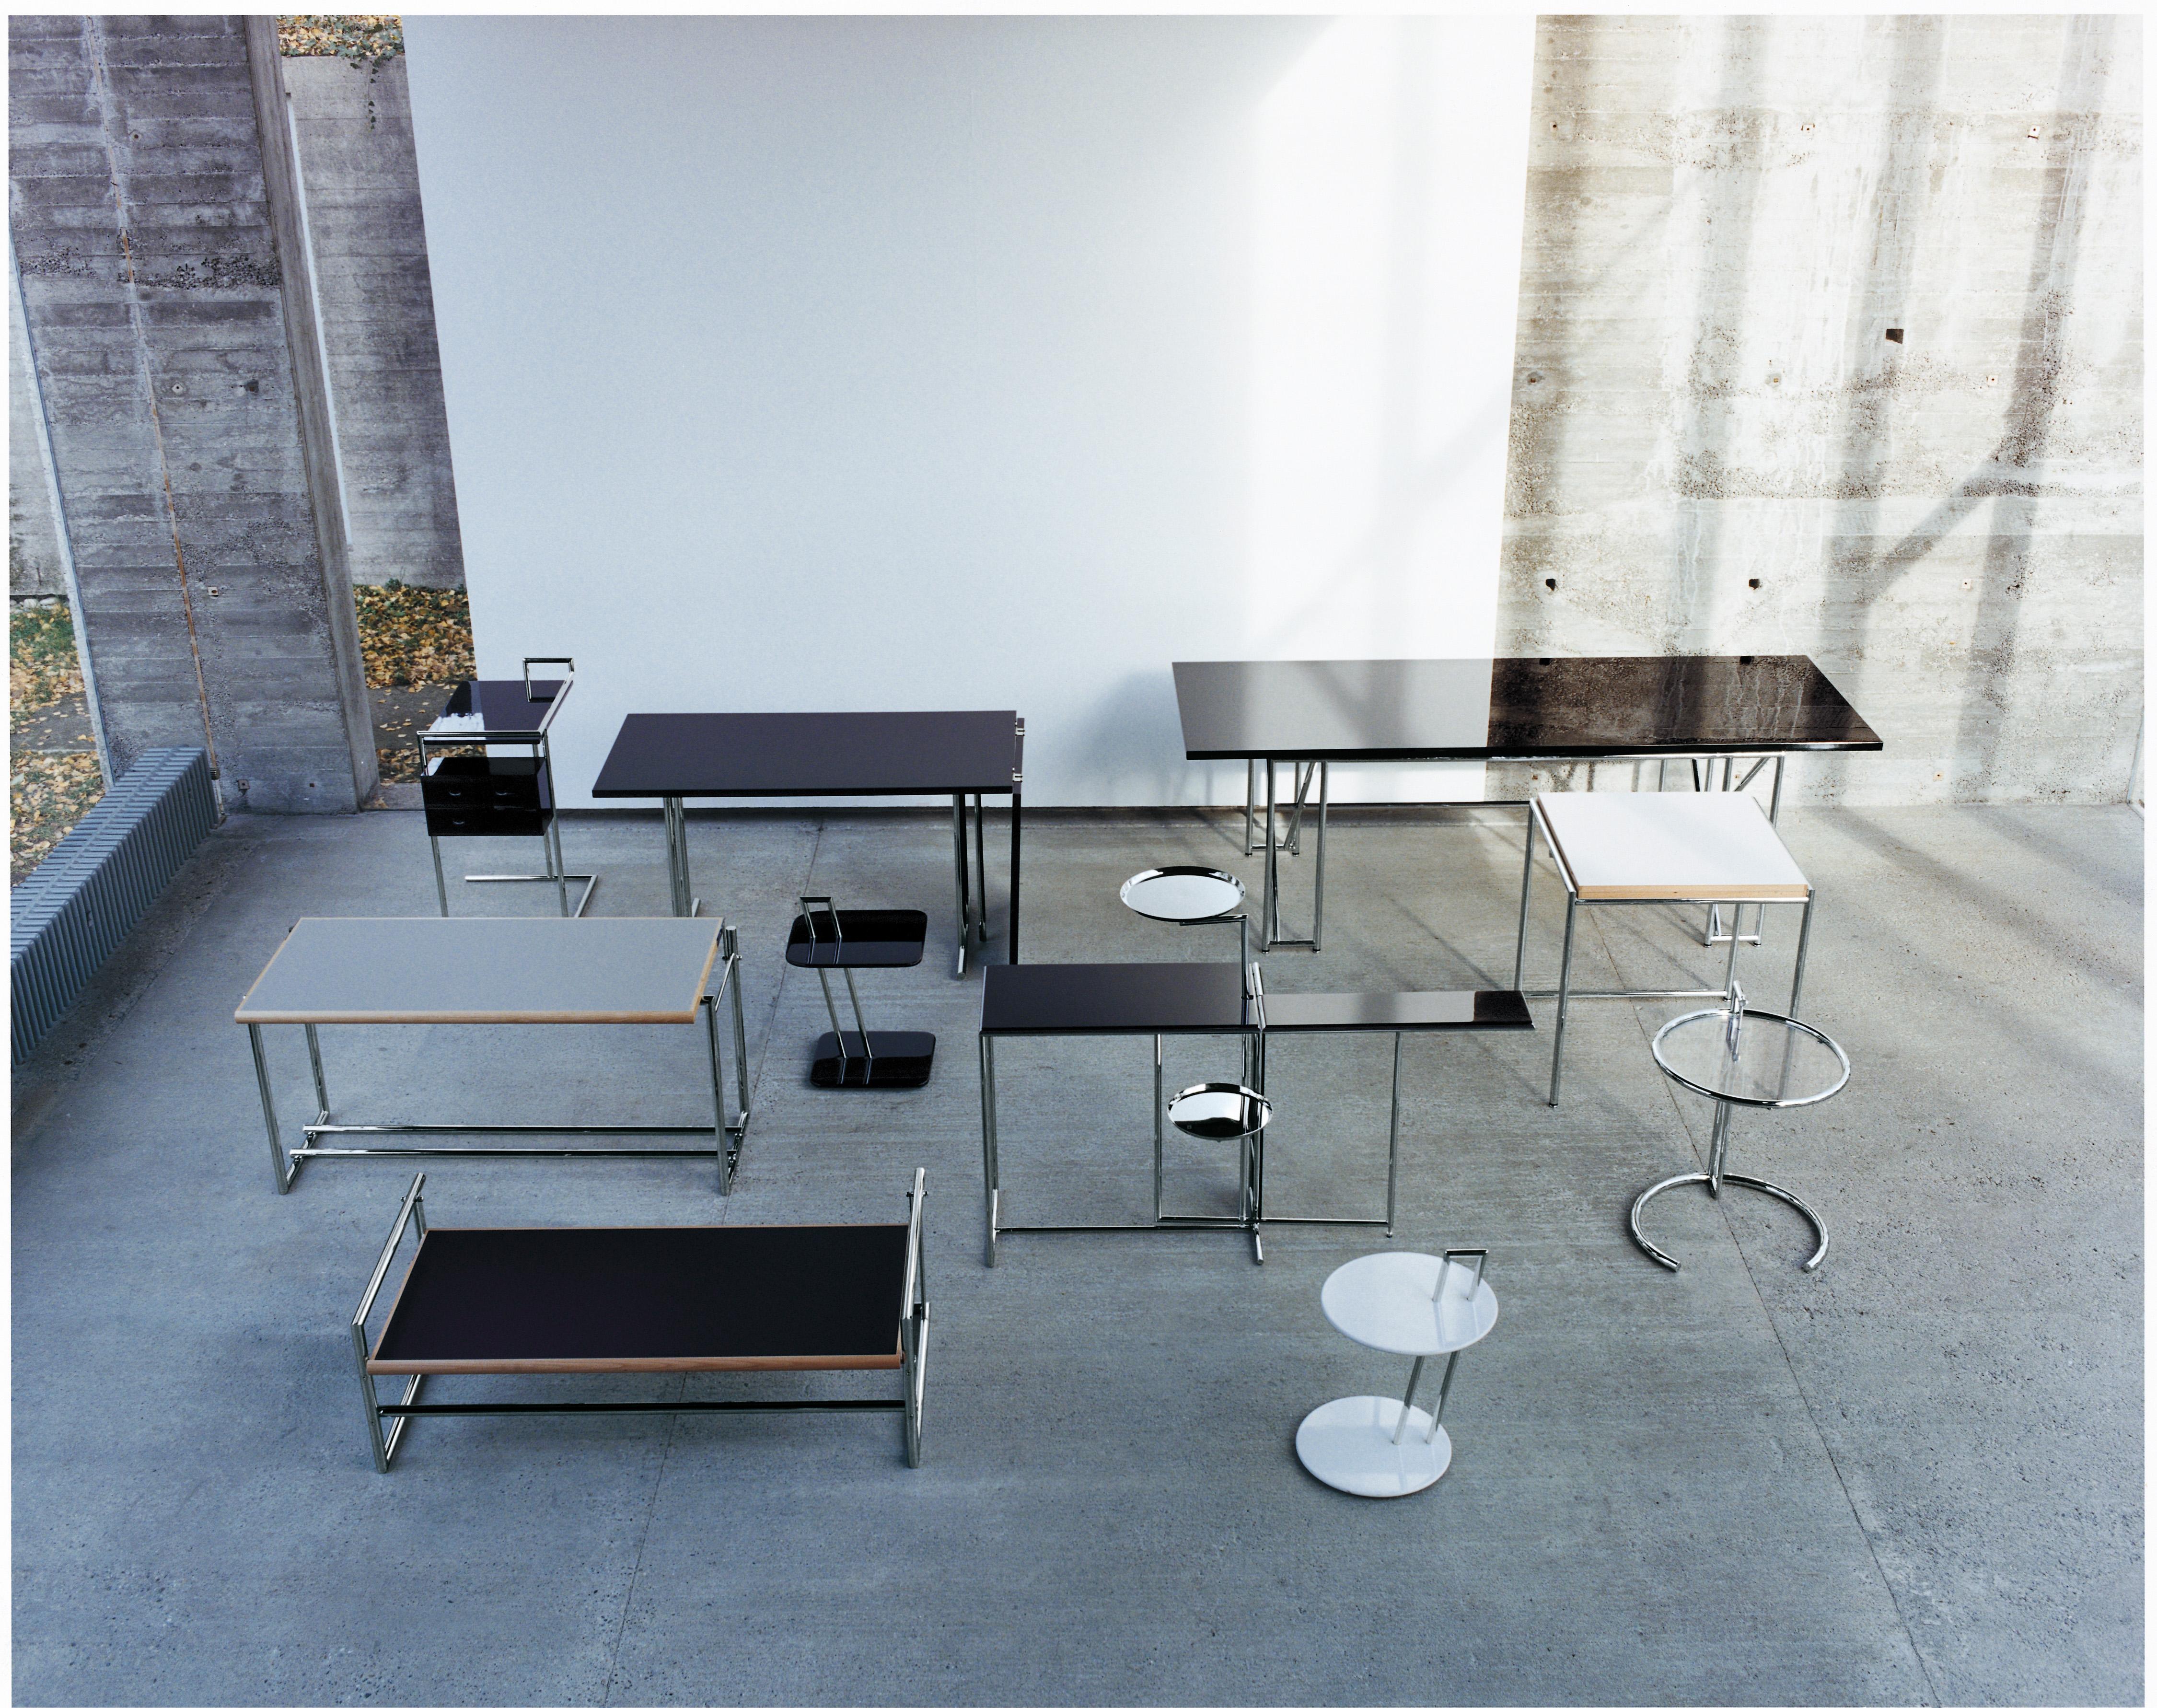 The Latin for furniture, res mobiles, is based on the word mobile. Eileen Gray took this very literally. She loved light, functional furniture that could be moved around easily. One can lift this table 